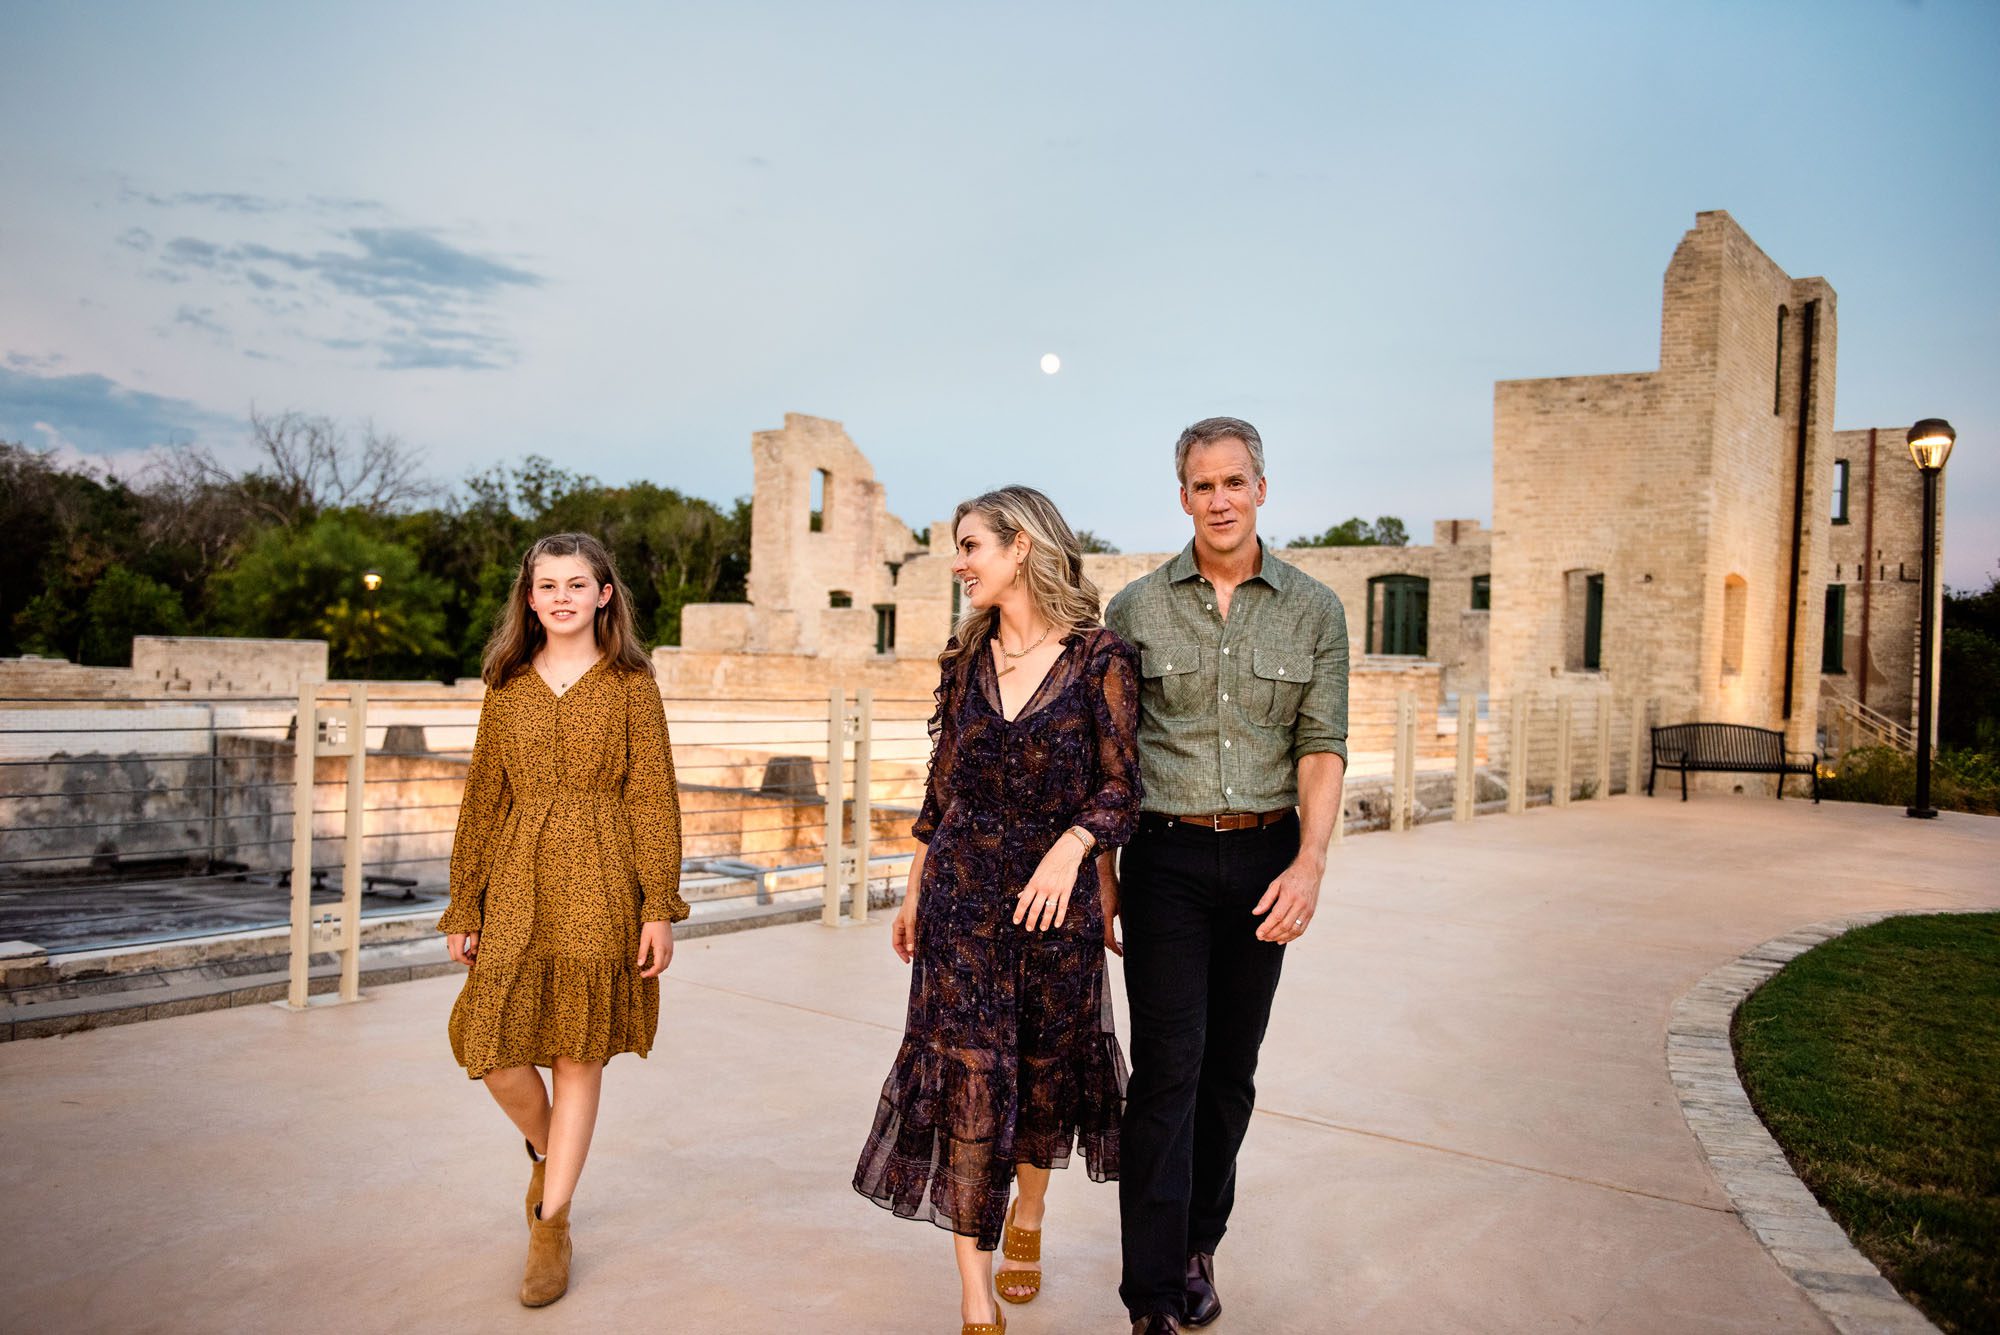 Family walking in front of old building with moon in the sky, San Antonio Lifestyle Photographer